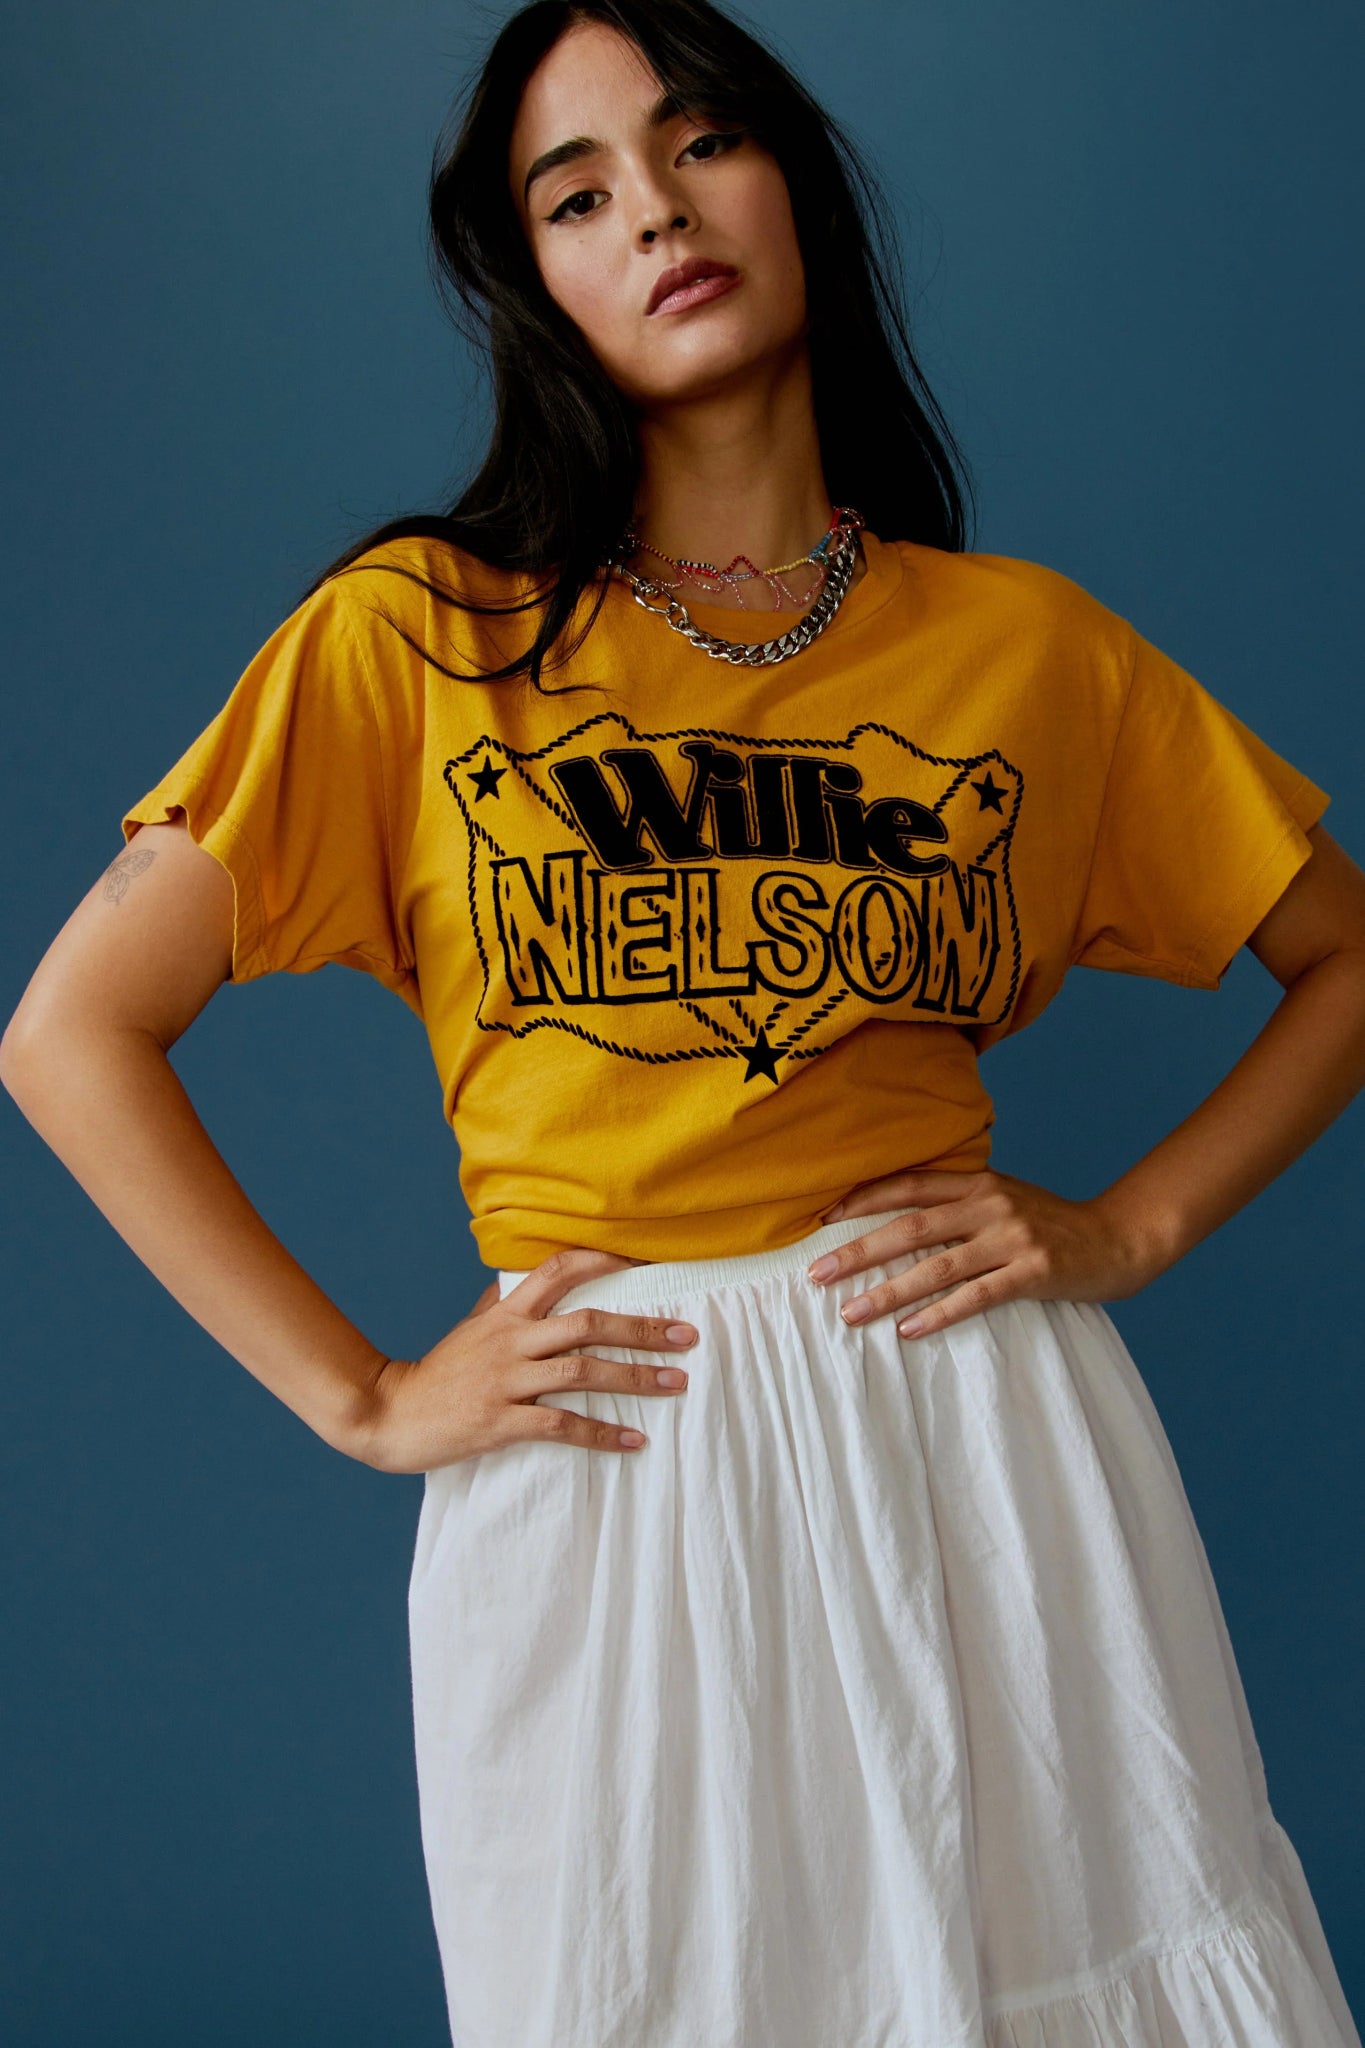 Daydreamer T-shirt | Willie Nelson | Solo Tee - Women's Shirts & Tops - Blooming Daily